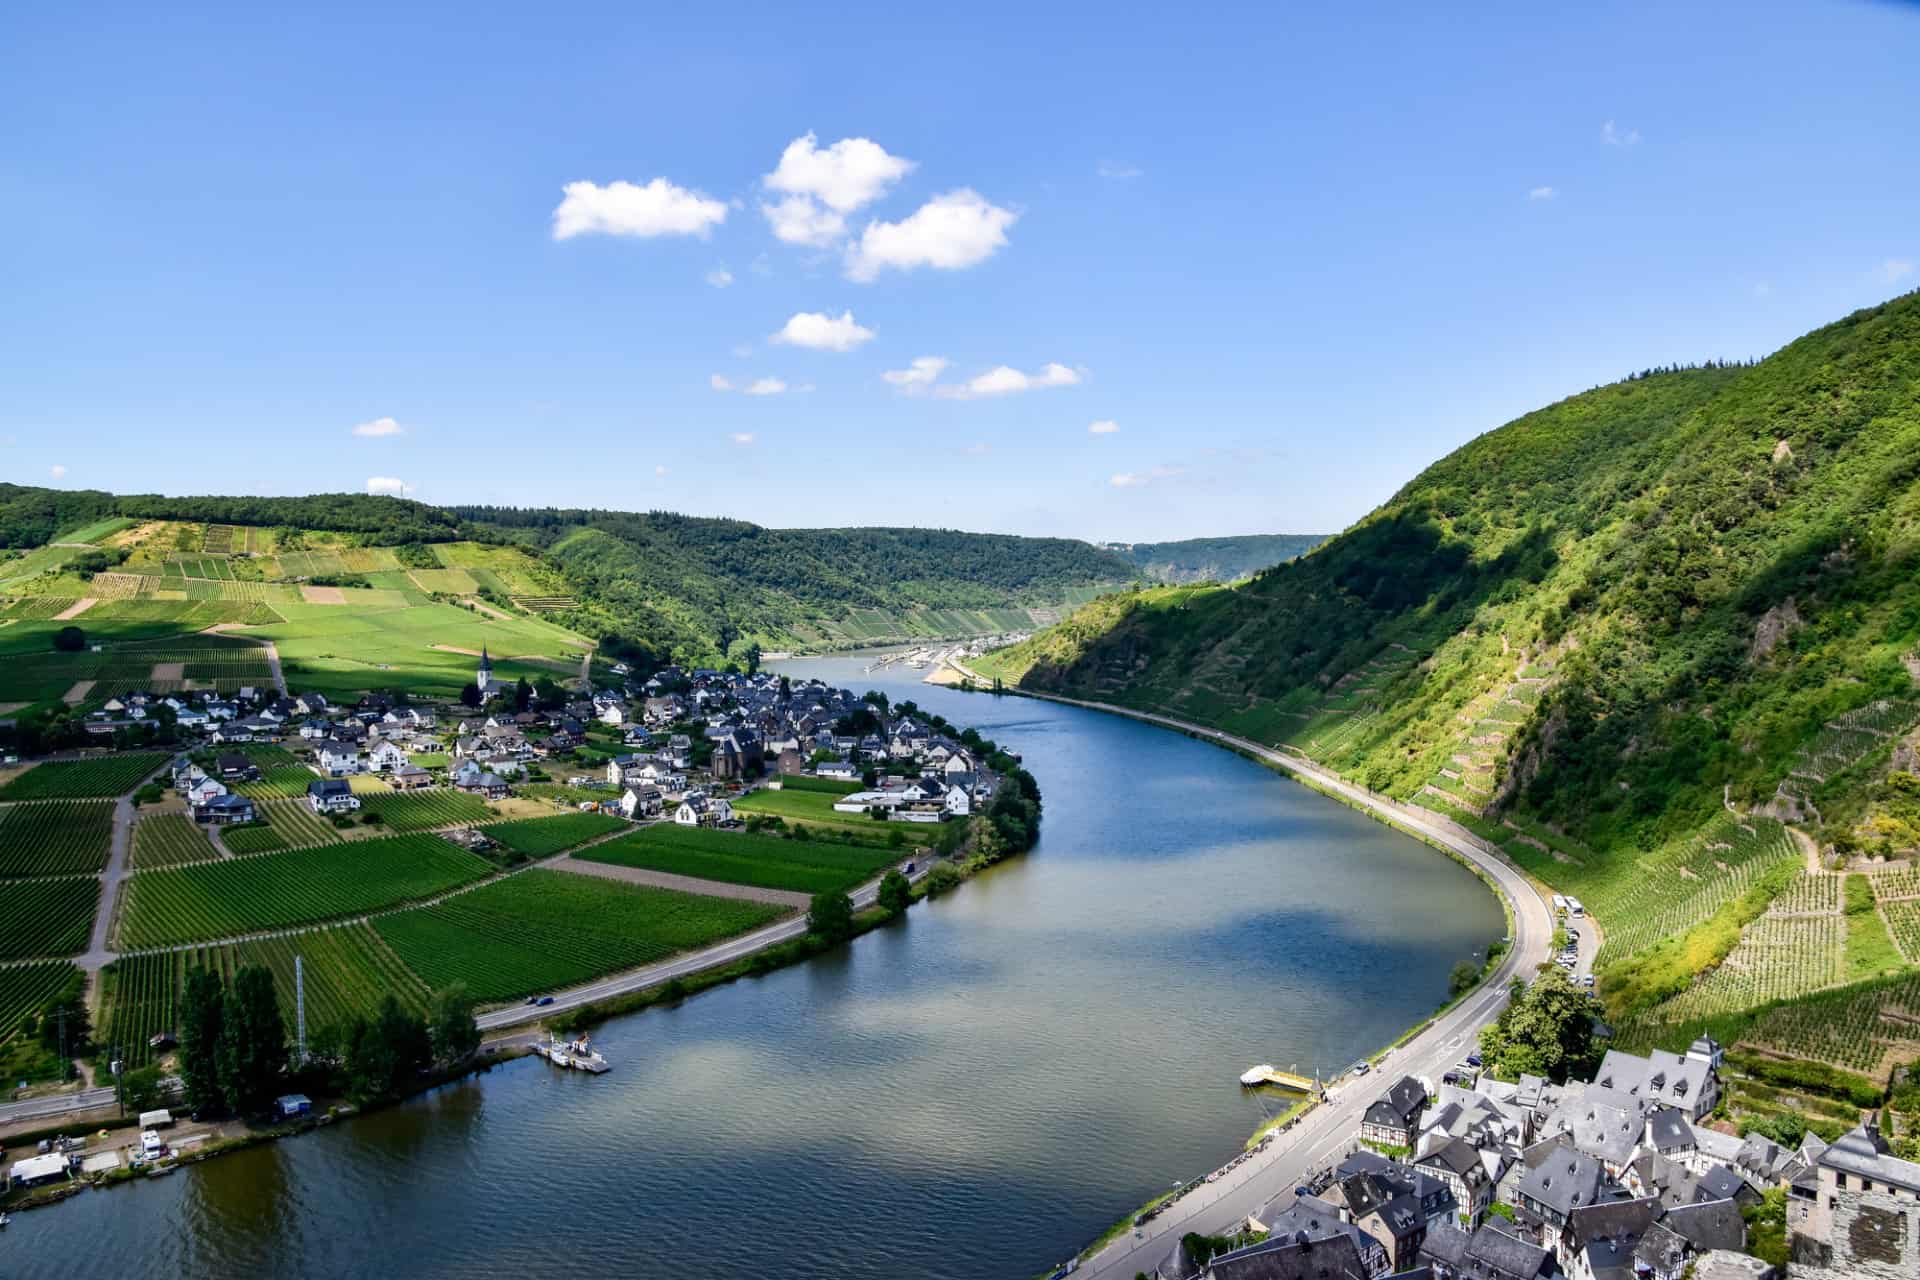 Beautiful shot of Moselle River